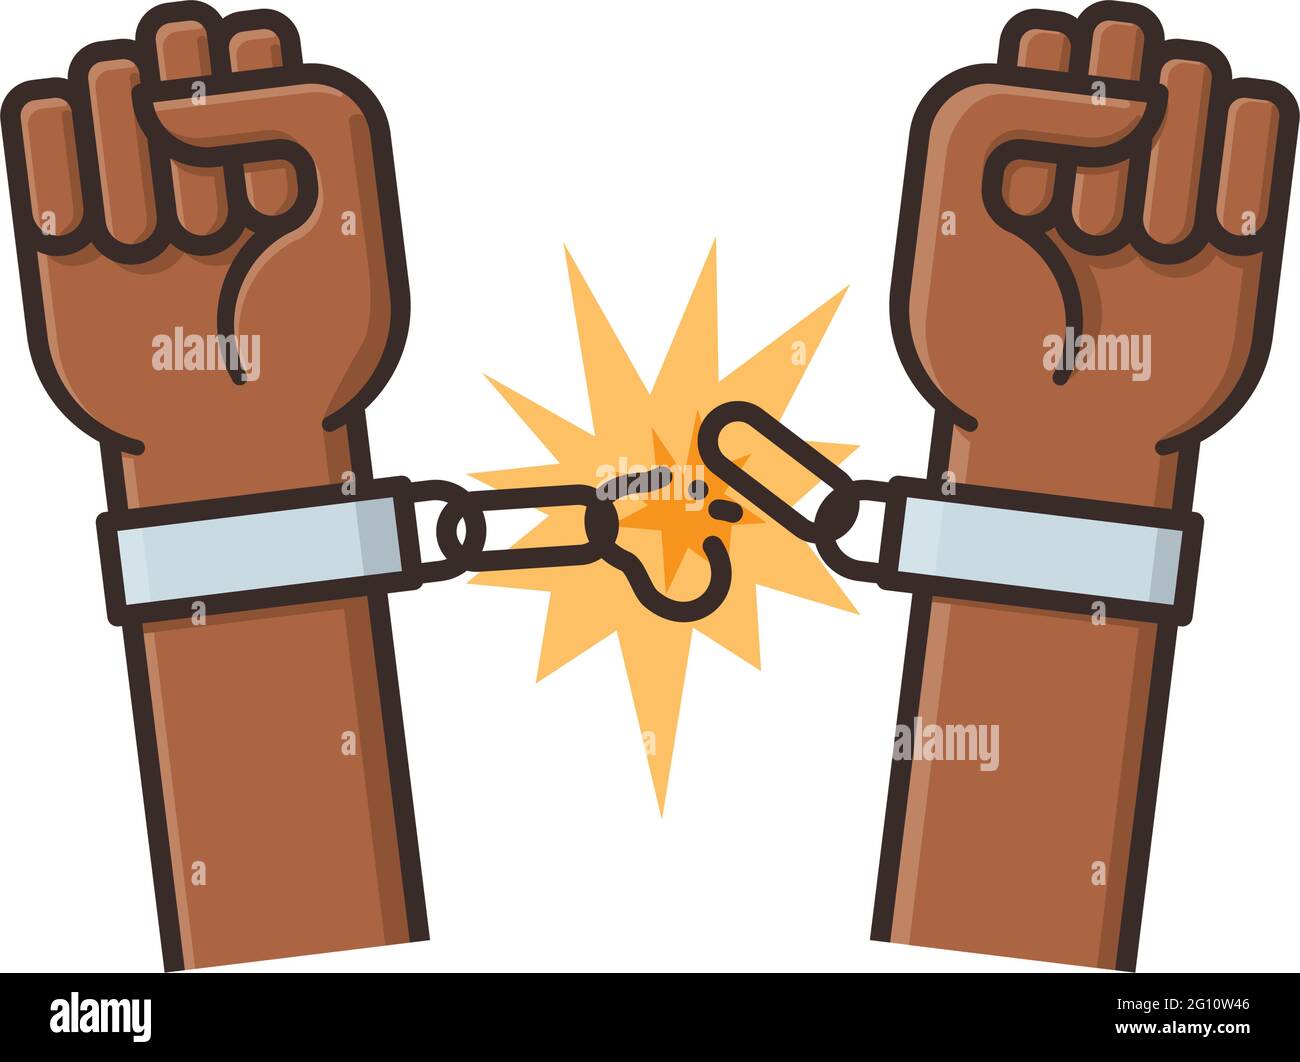 Hands freeing themselves from shackles isolated vector illustration for International Day for the Abolition of Slavery on December 2 Stock Vector